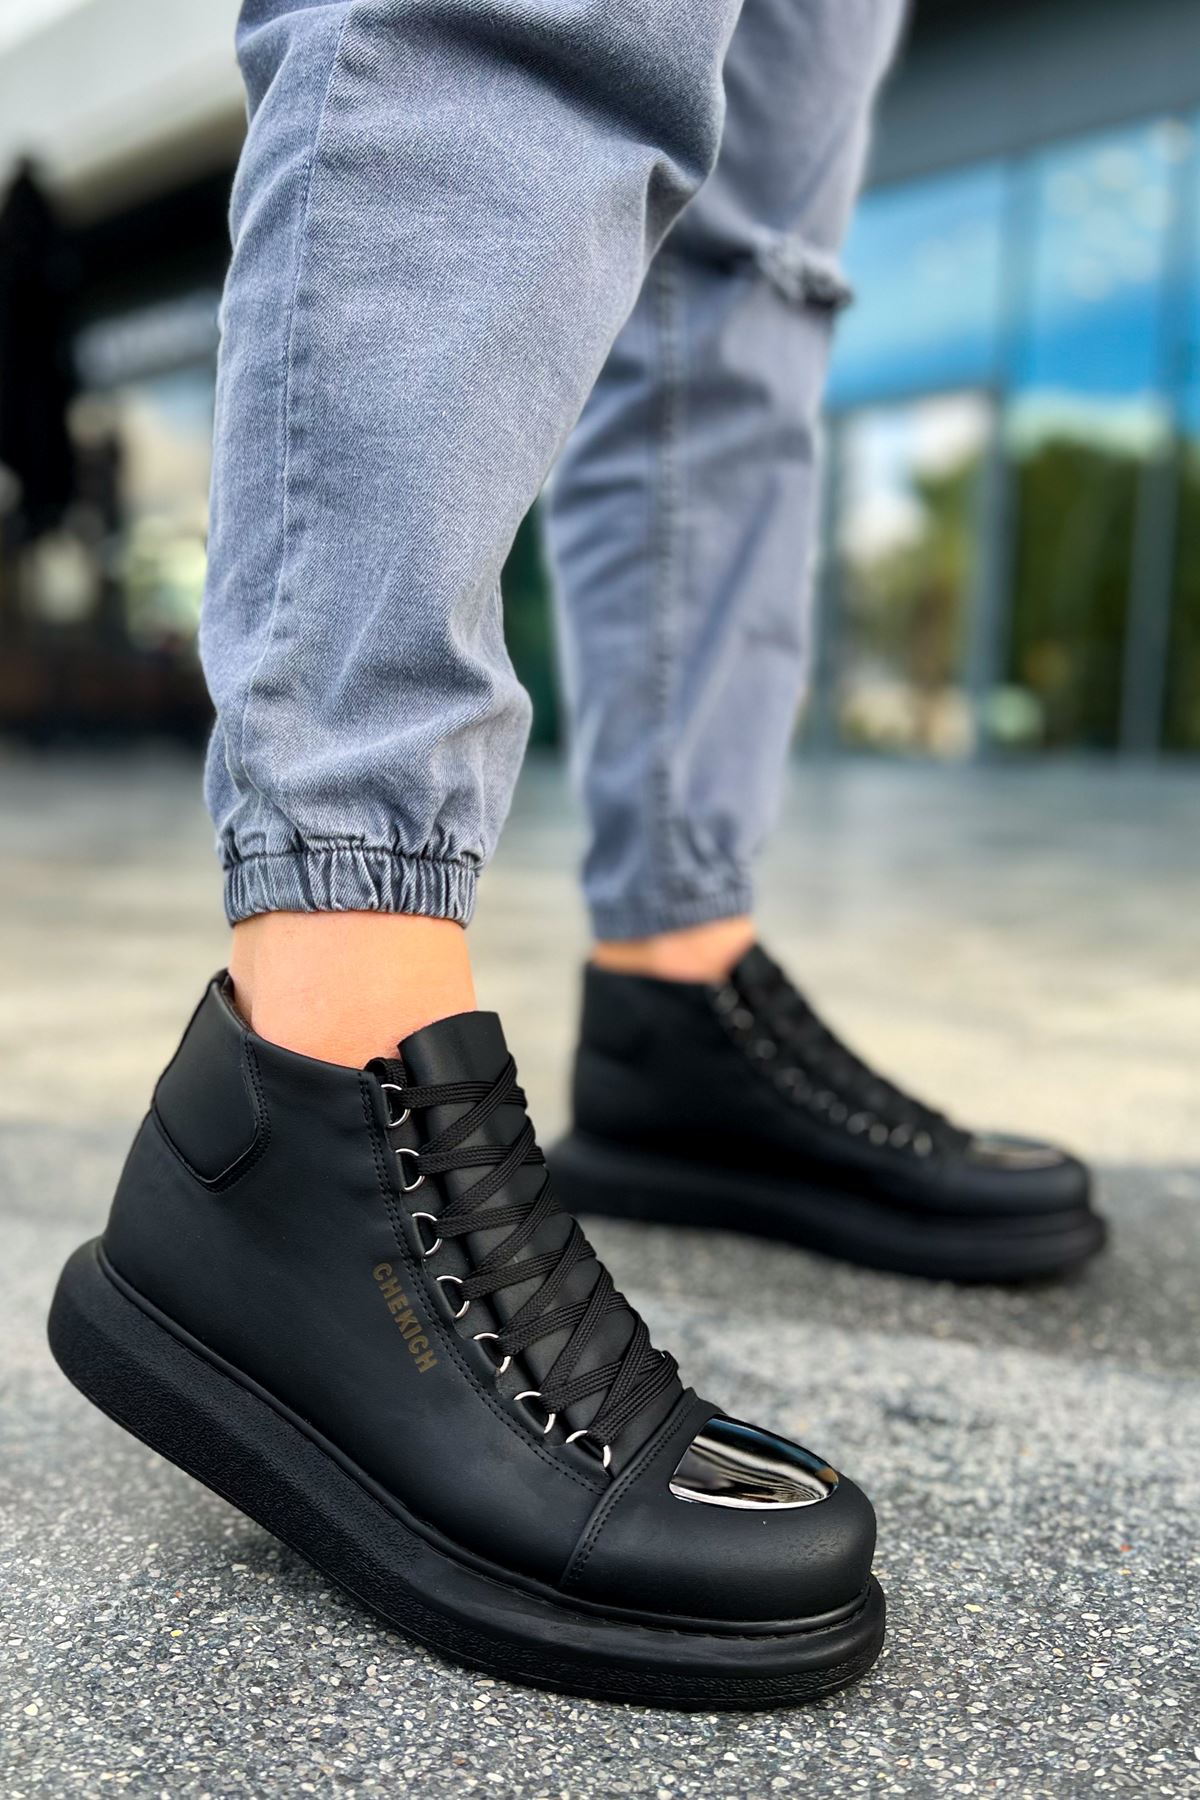 CH267 ST Men's Boots BLACK - STREETMODE ™